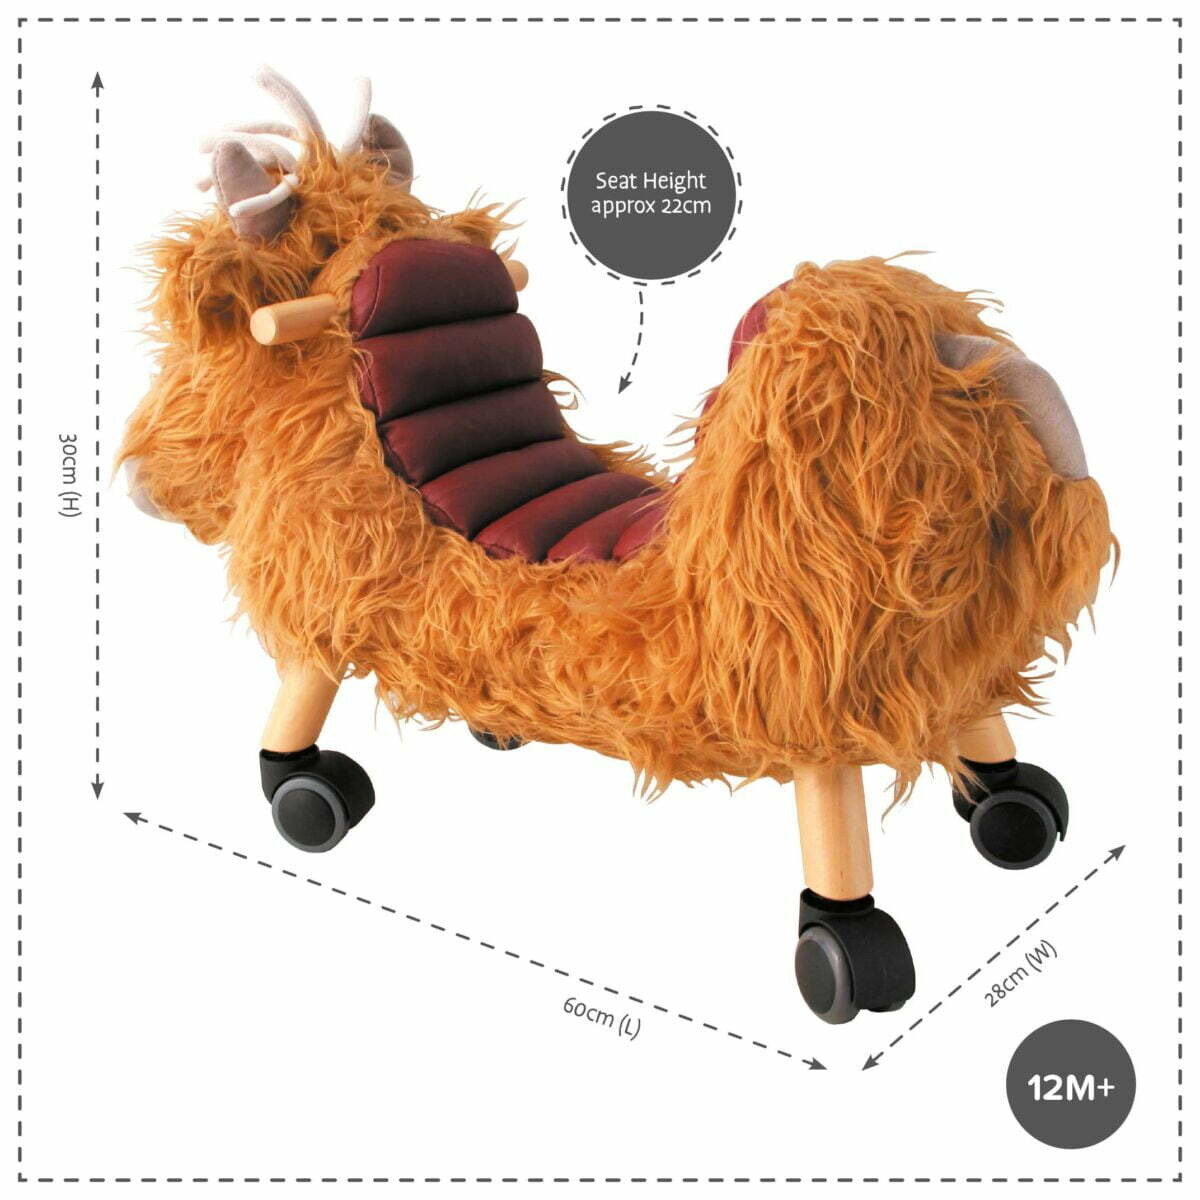 Product dimensions displayed for Hubert Highland Cow Ride On Toy